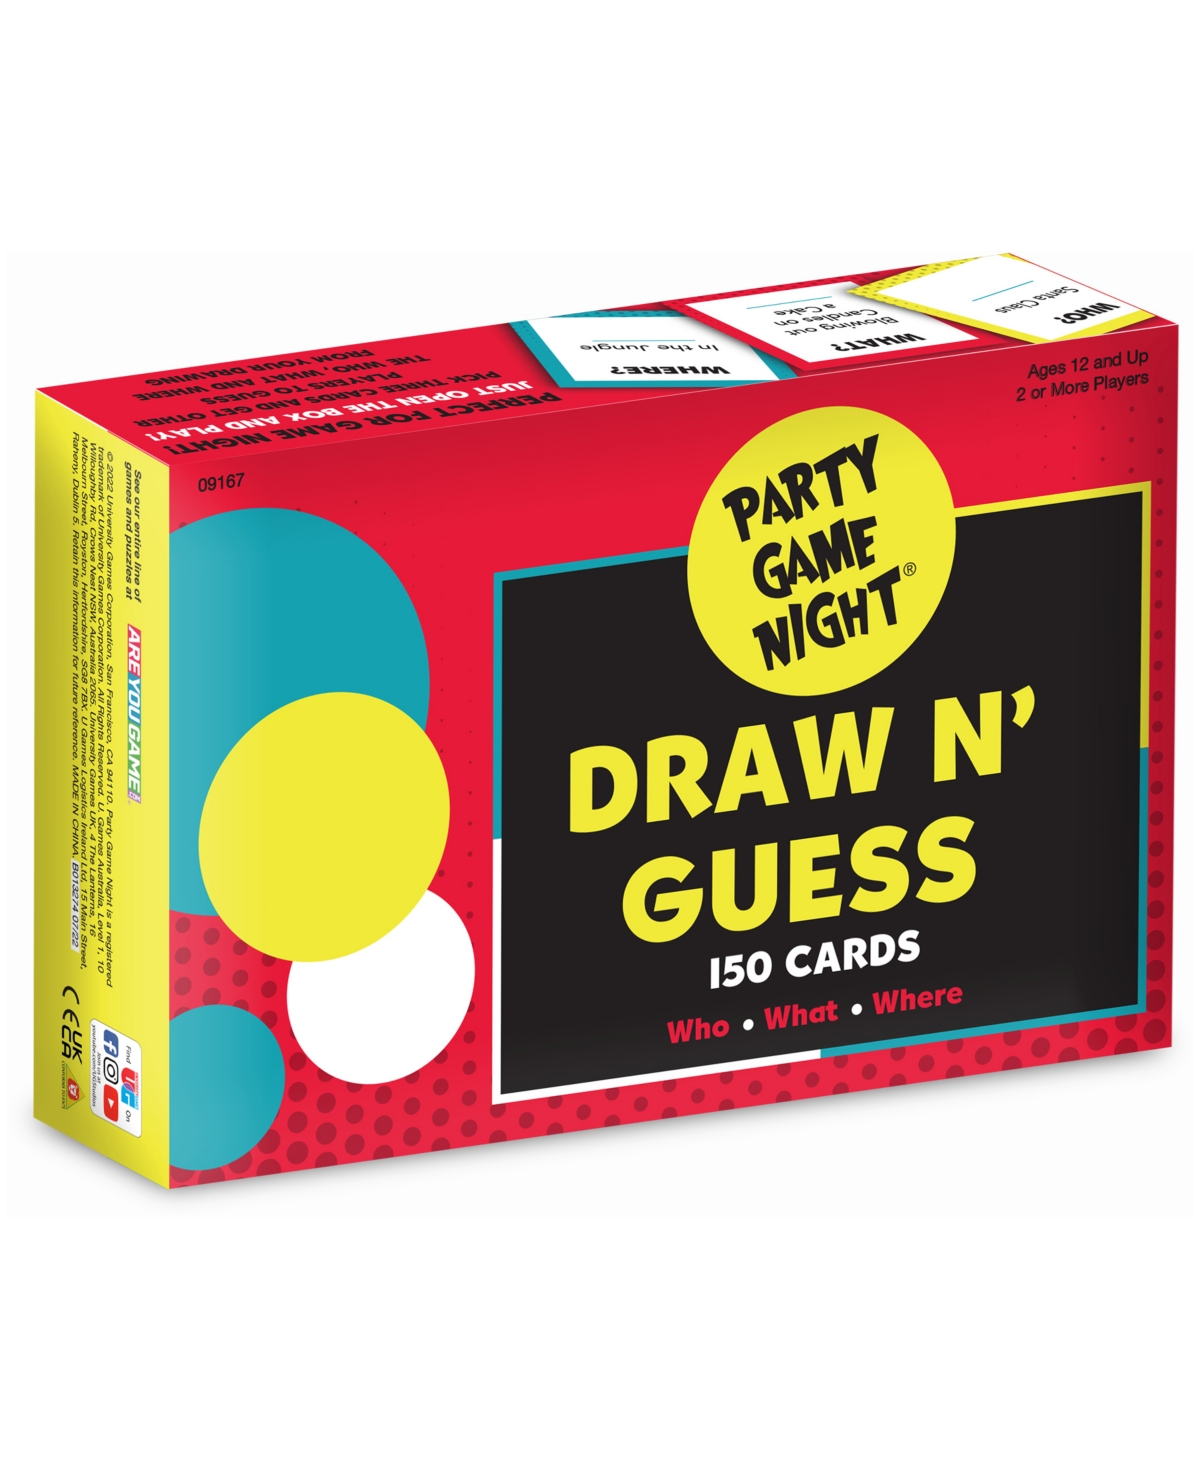 University Games Kids' Party Game Night, Draw N' Guess Cards In No Color